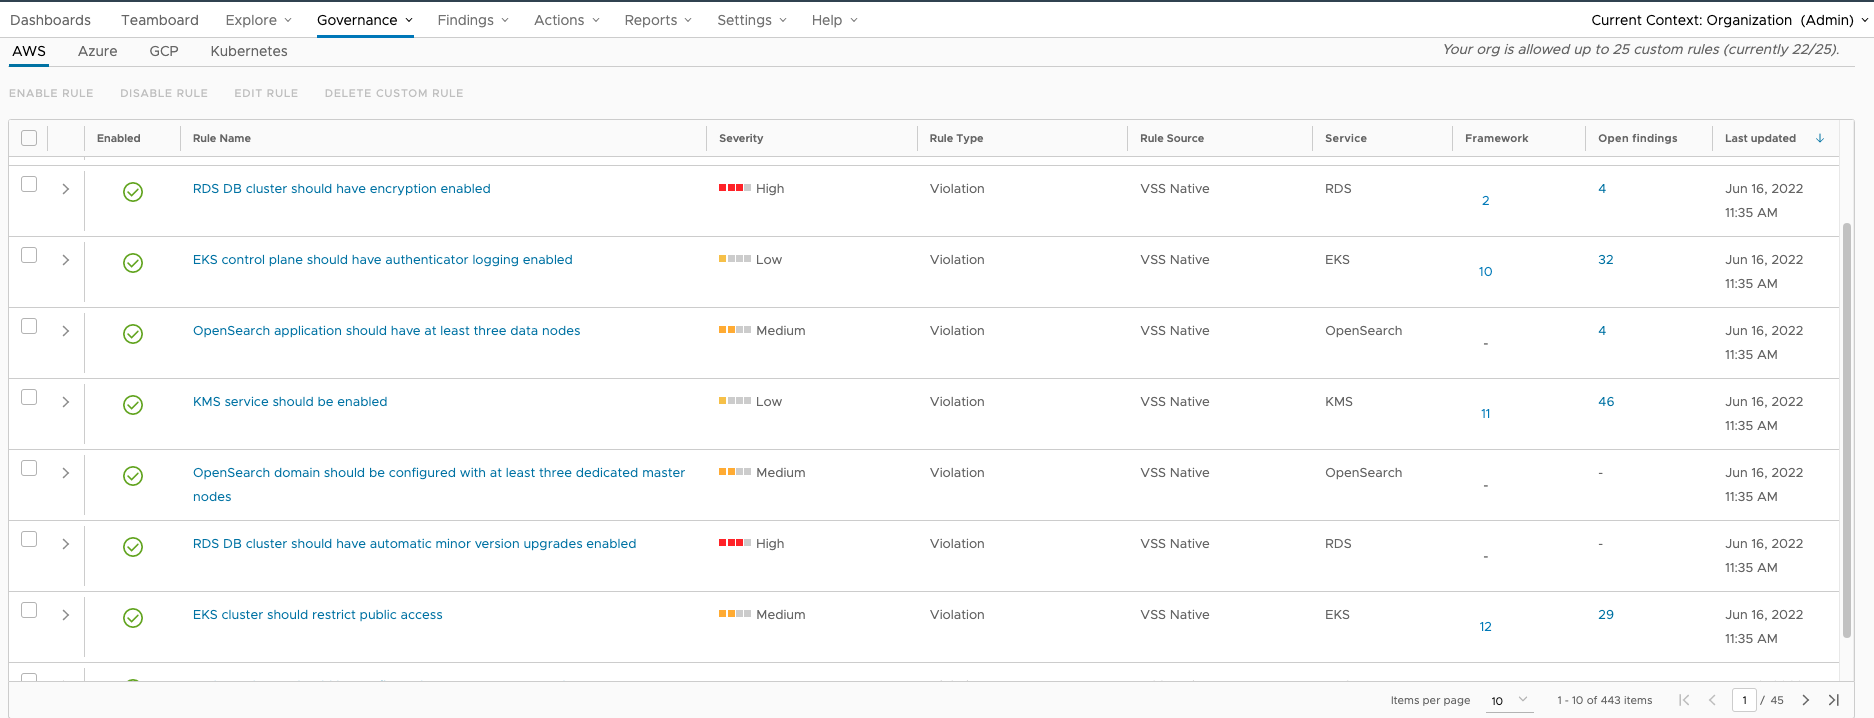 Main rule page showing a list of available rules for AWS